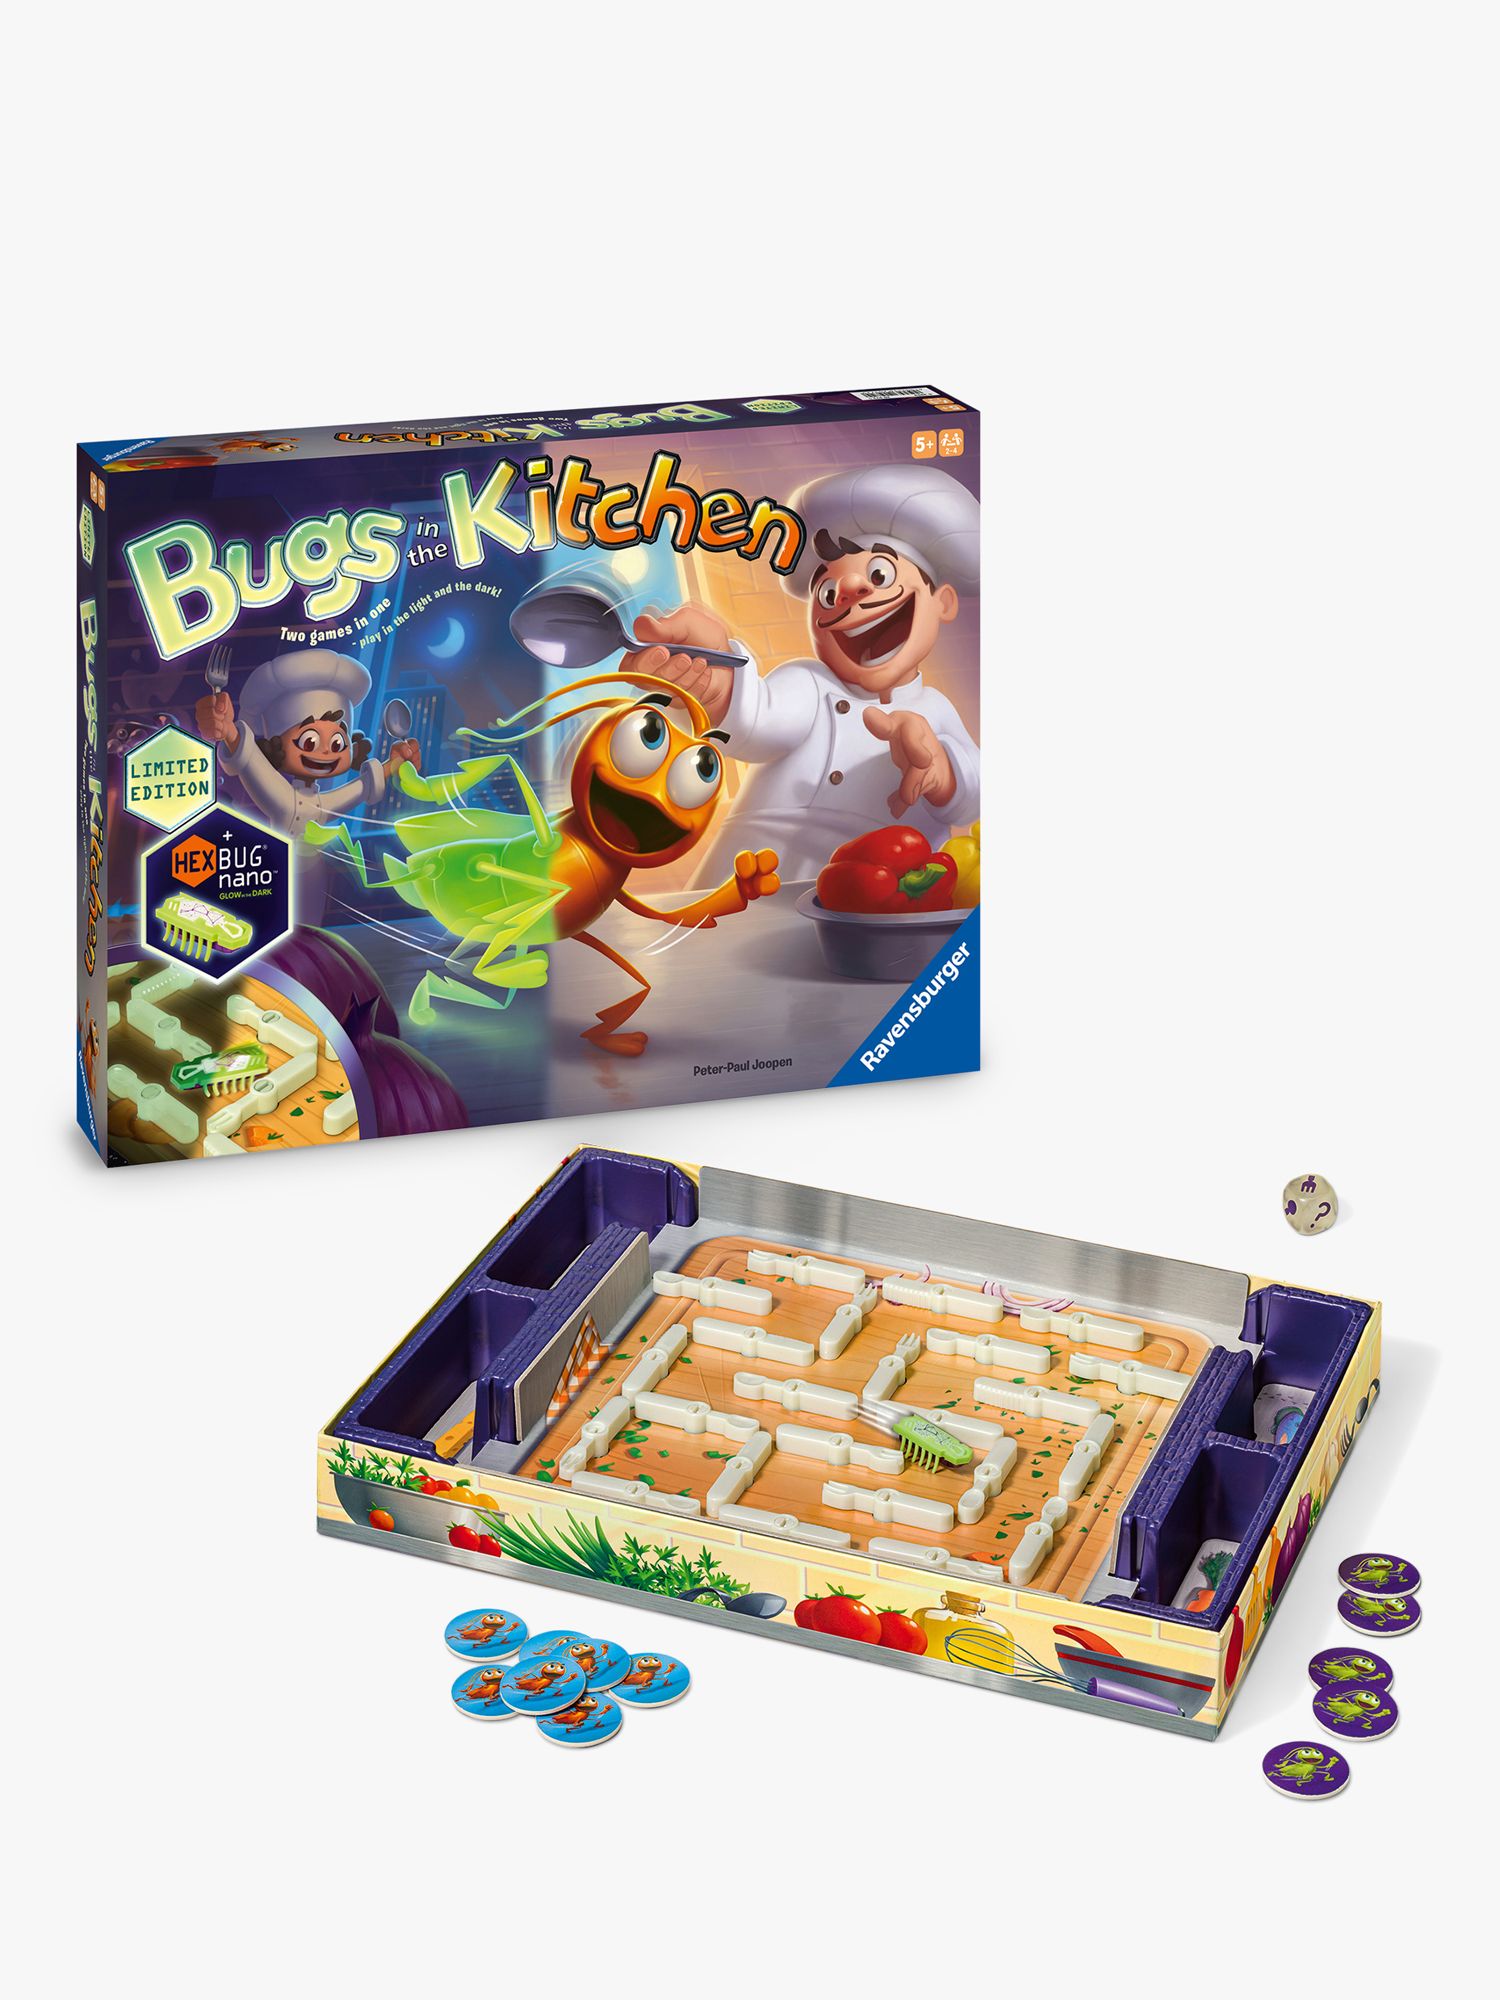  Bugs in the Kitchen - Children's Board Game, Standard, 6 - 15  years